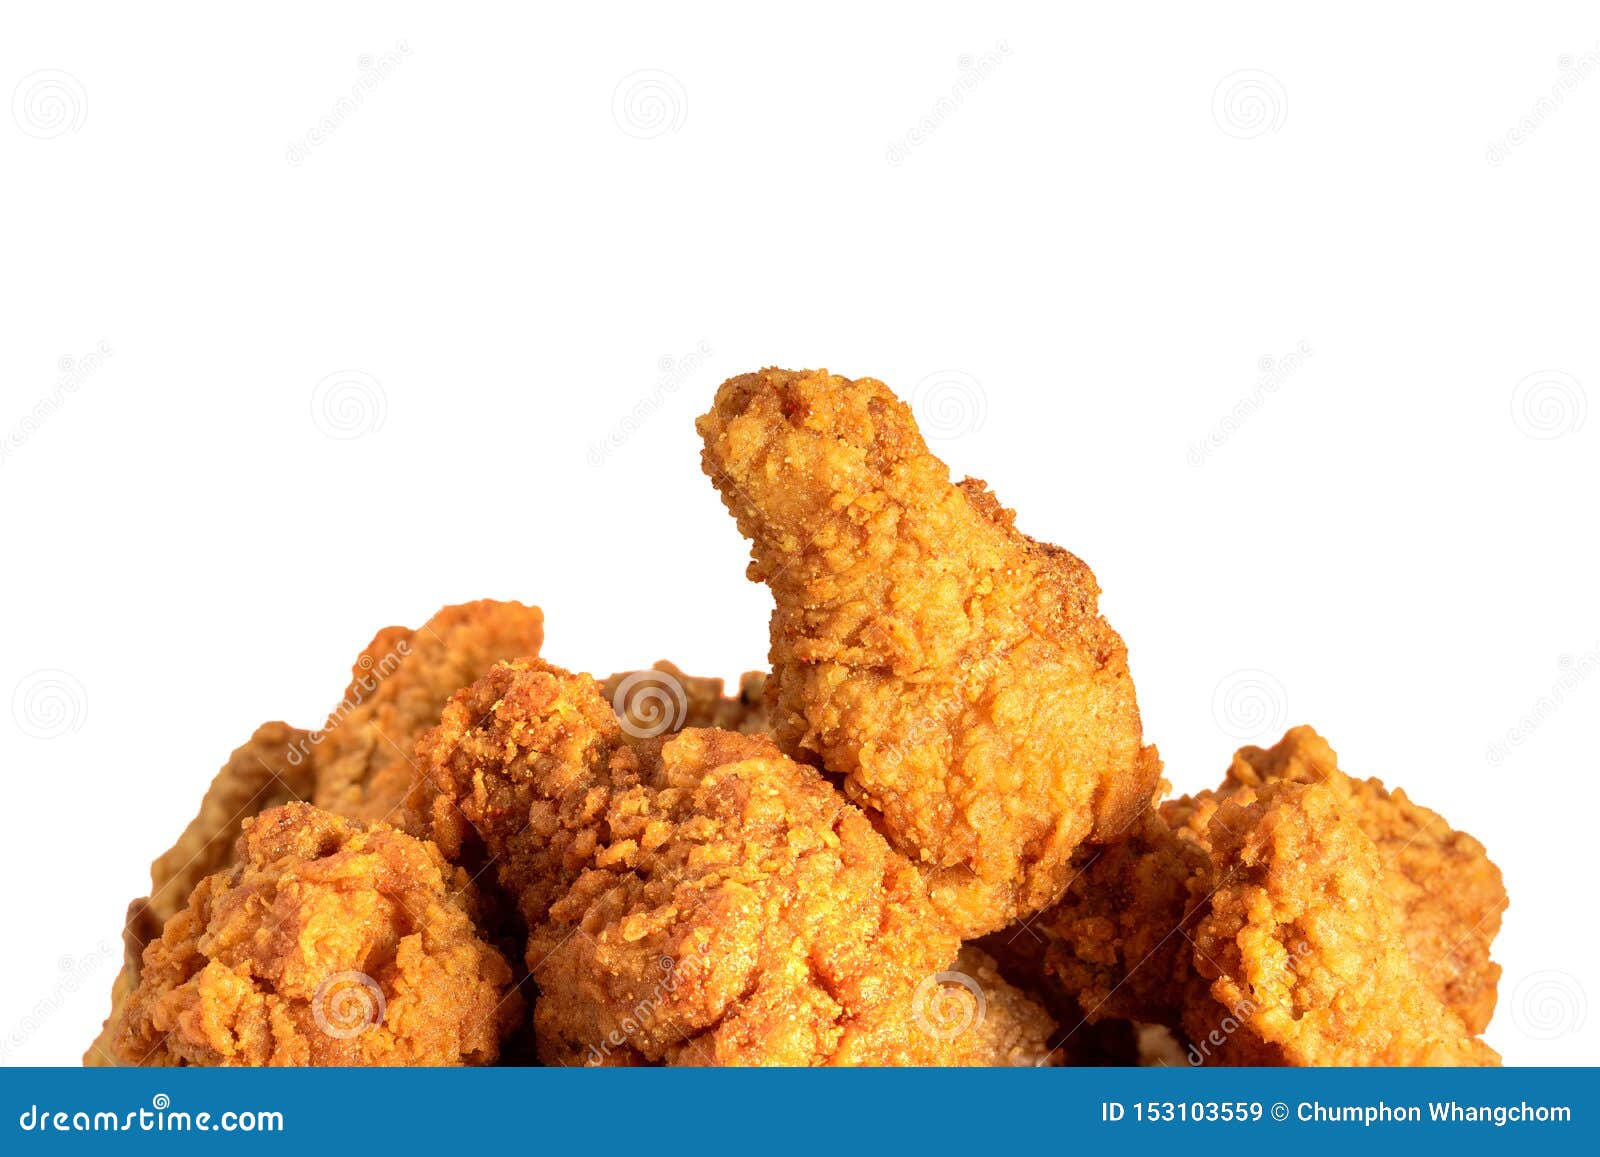 fried chicken or crispy kentucky isolted on white background. delicious hot meal with fast food